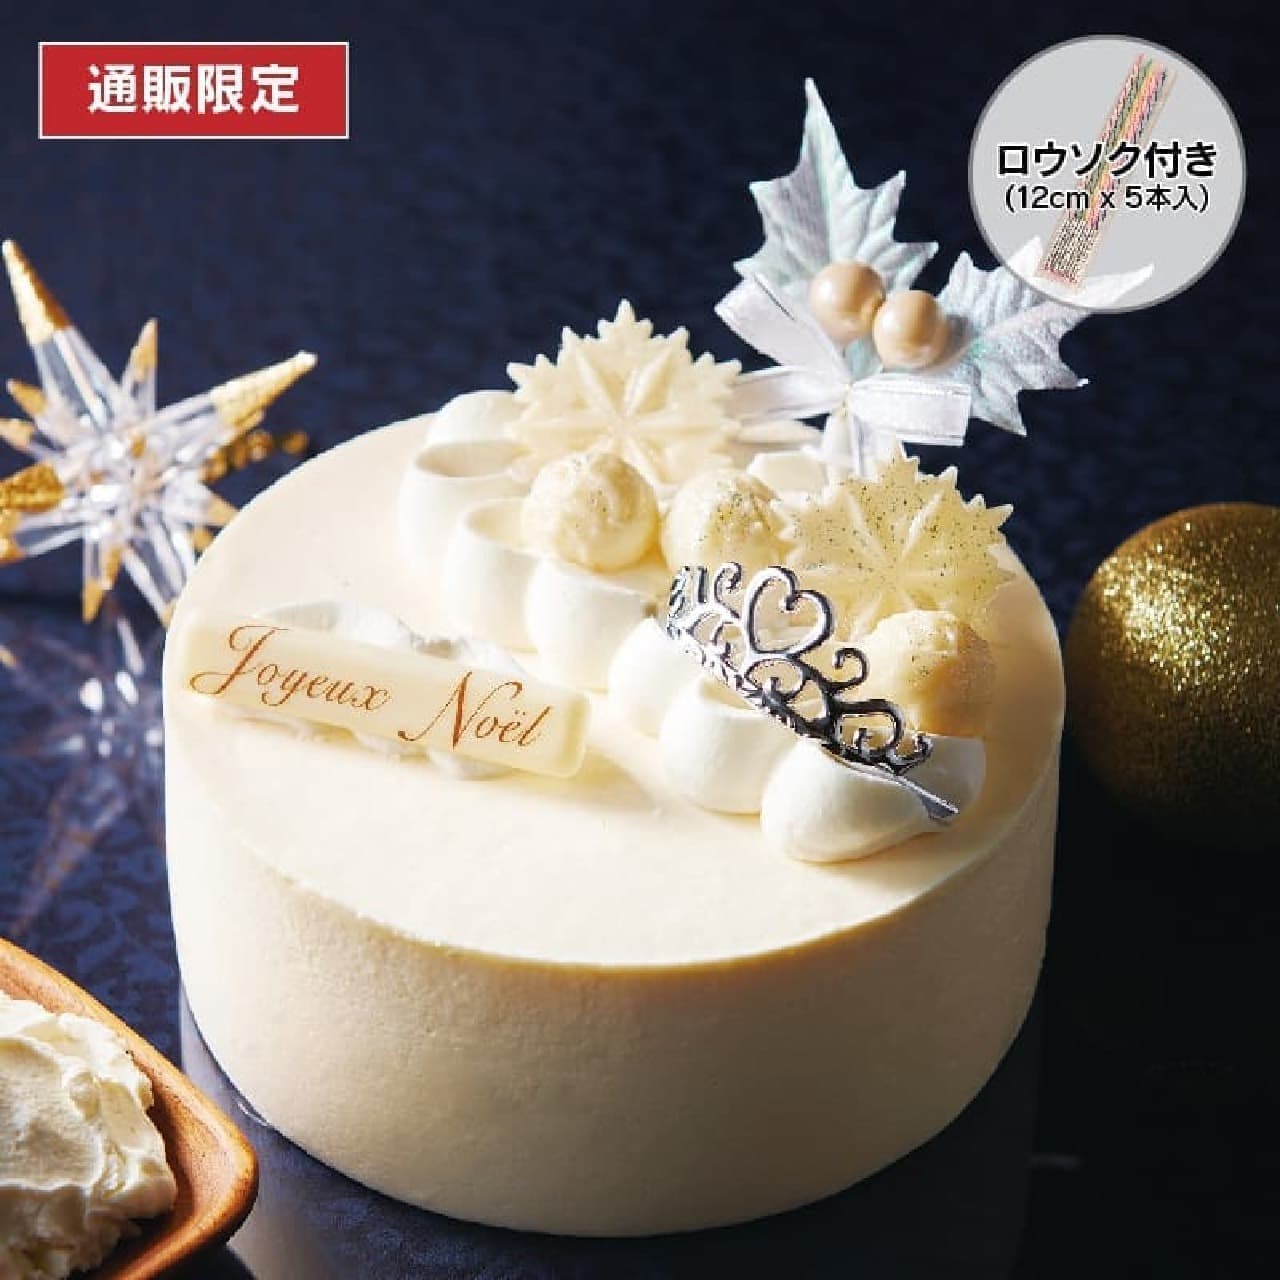 Chateraise "[Mail order] Xmas double cheese decoration 14cm using French cream cheese".